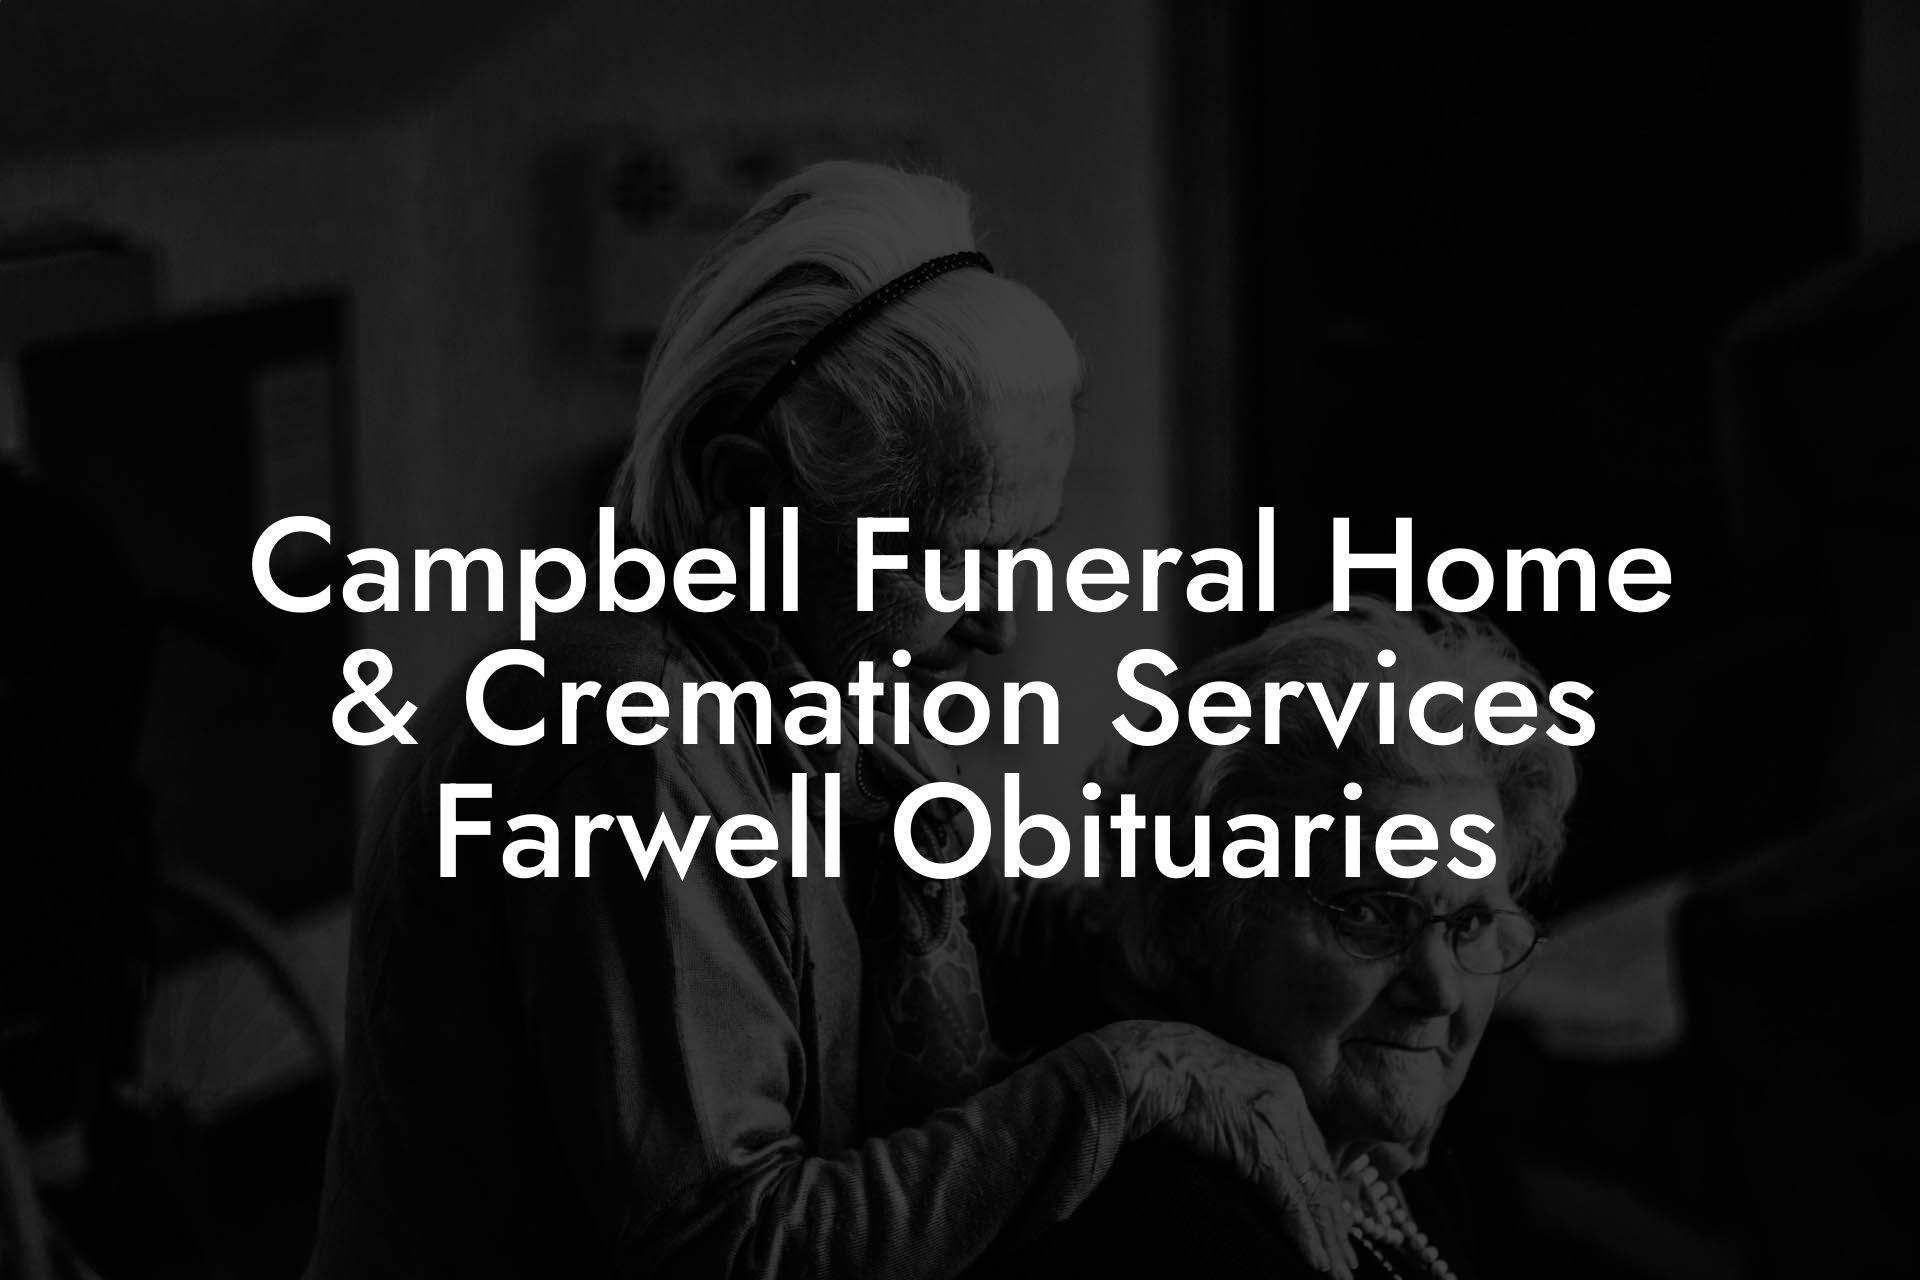 Campbell Funeral Home & Cremation Services Farwell Obituaries